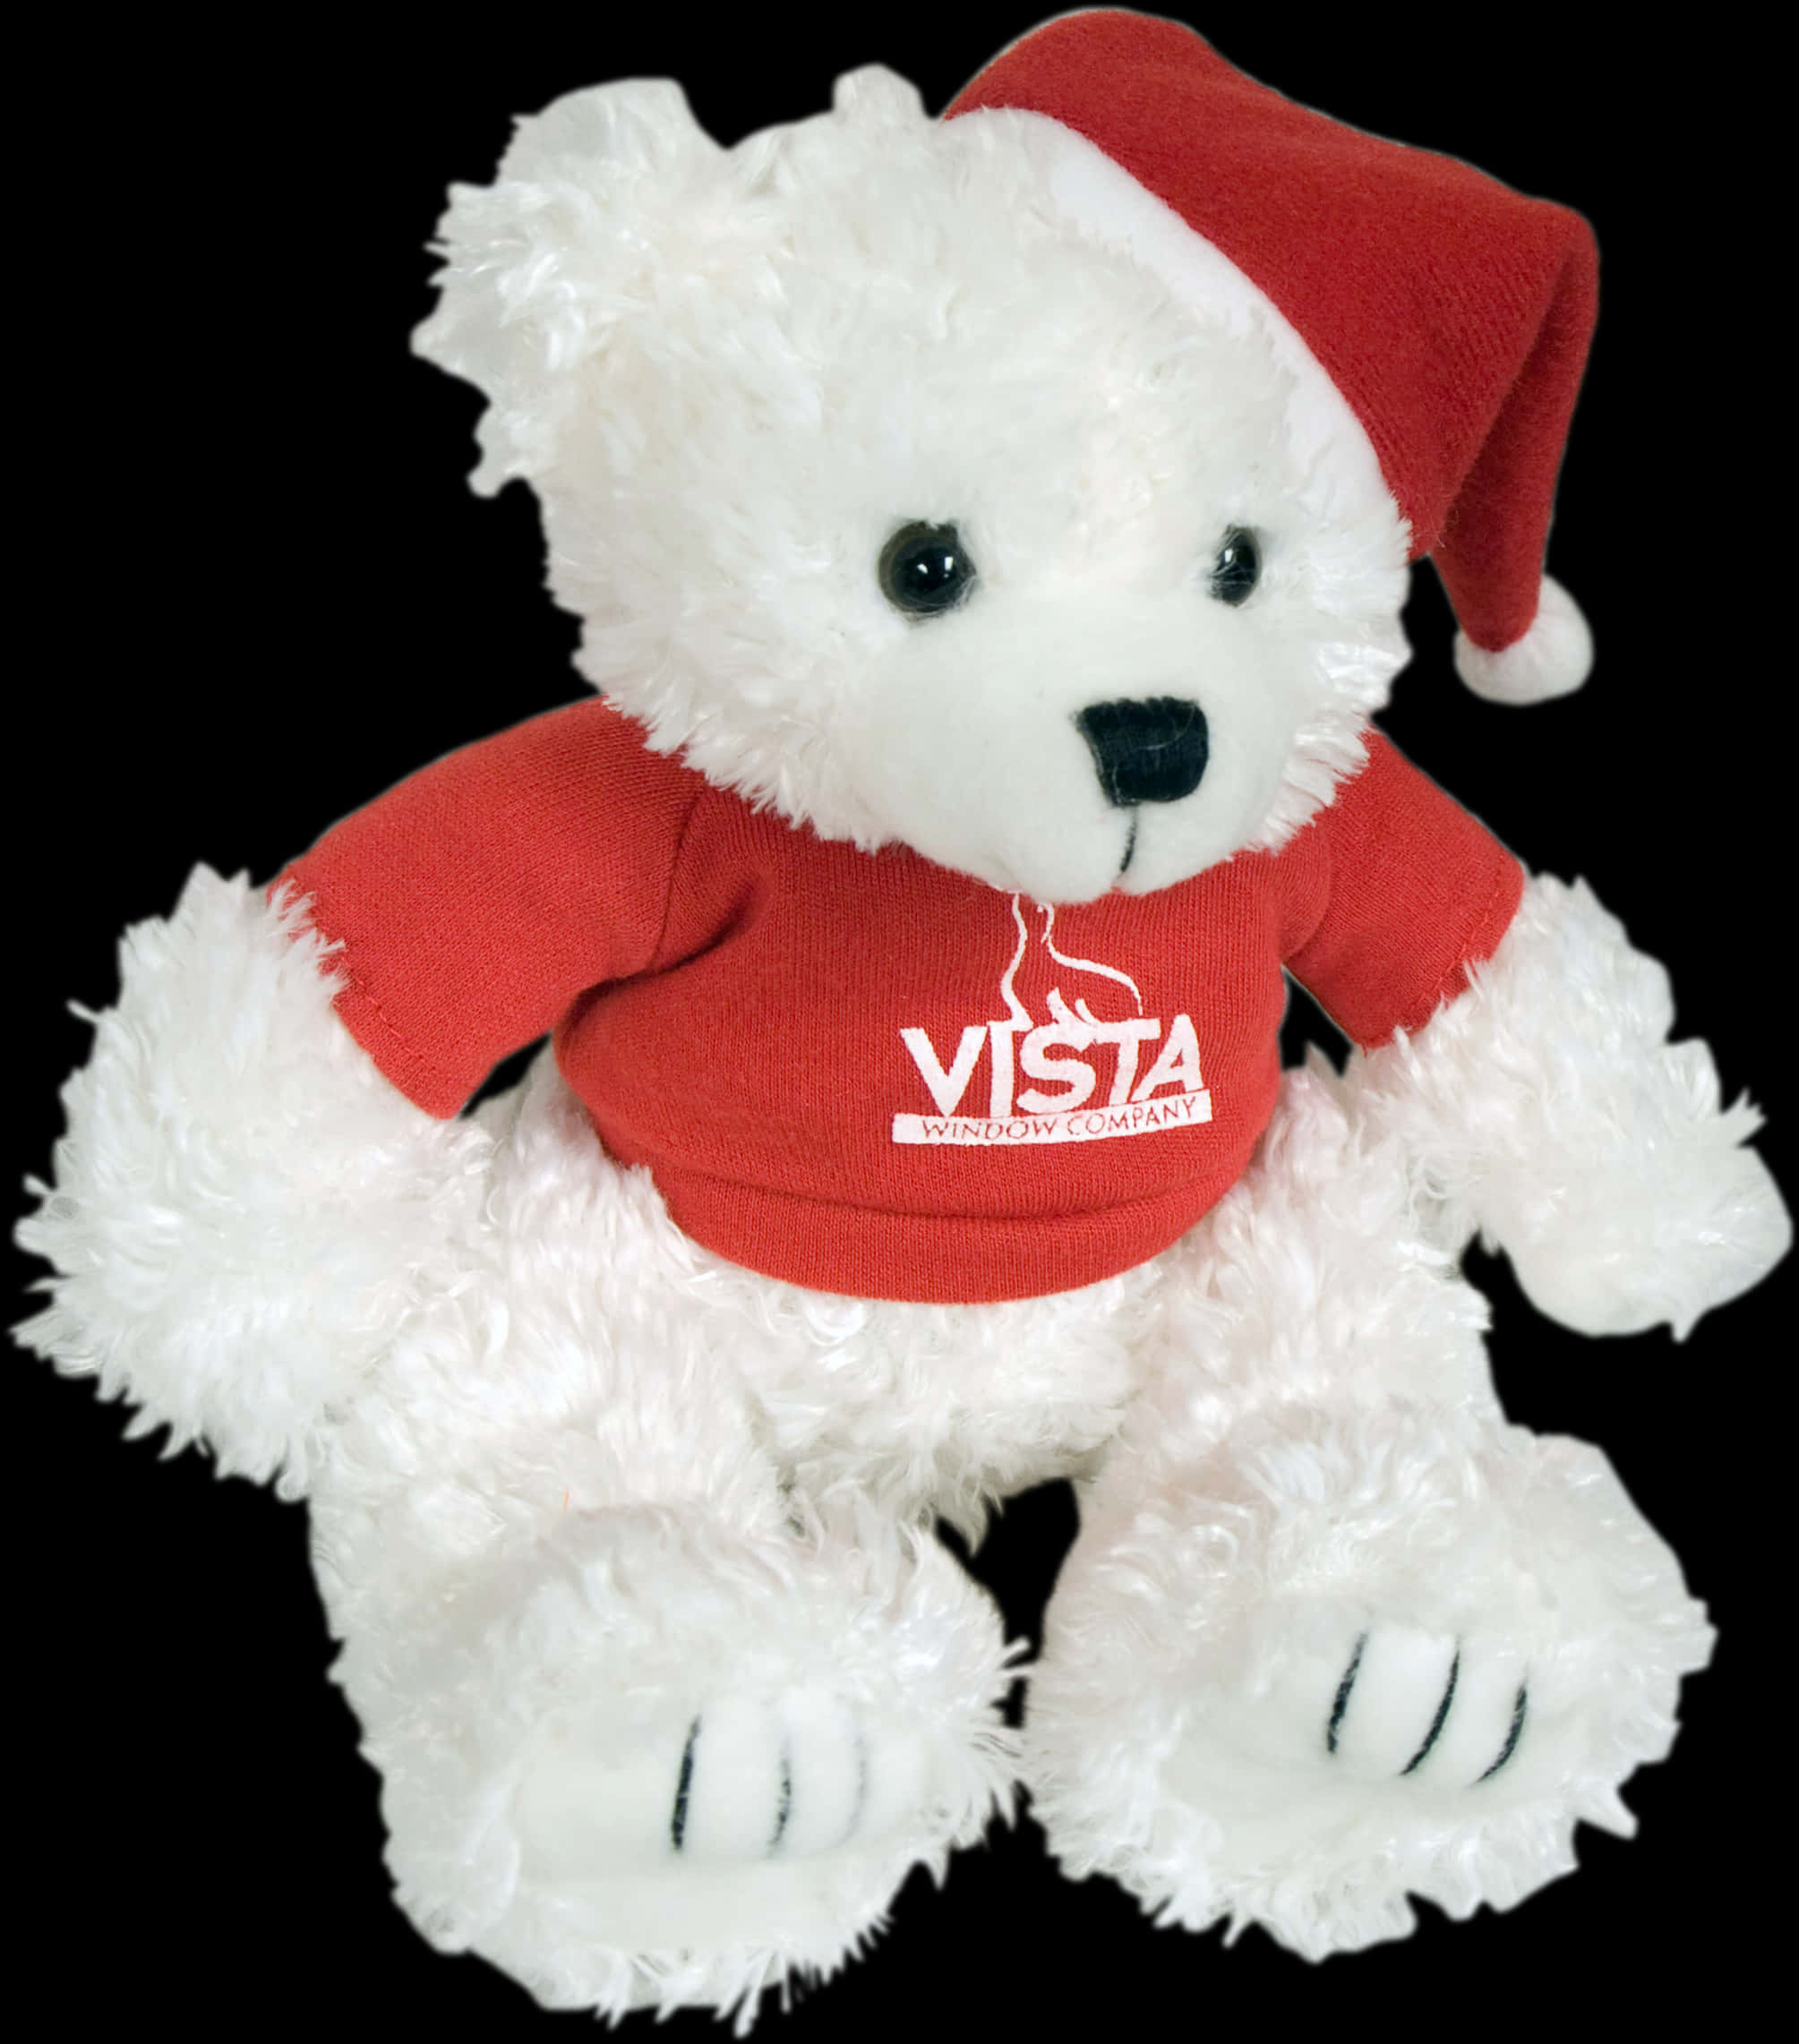 A White Teddy Bear Wearing A Red Shirt And A Red Hat